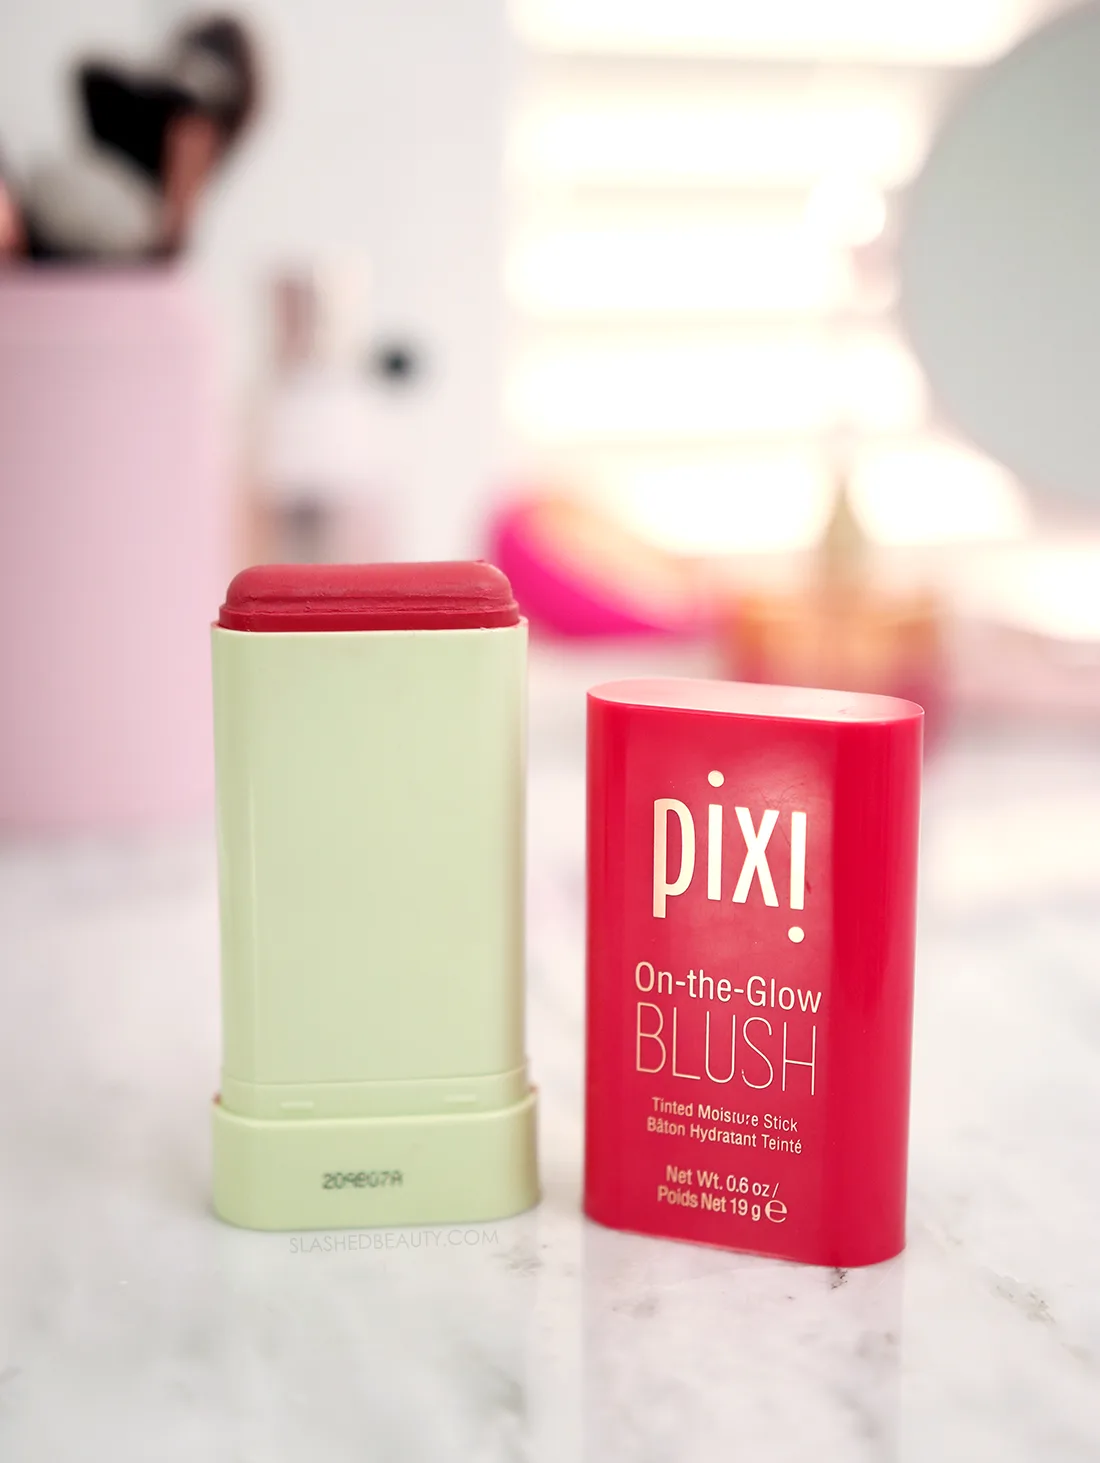 Pixi On-the-Glow Blush Stick open on a marble surface | Pixi On-the-Glow Blush Review | Slashed Beauty